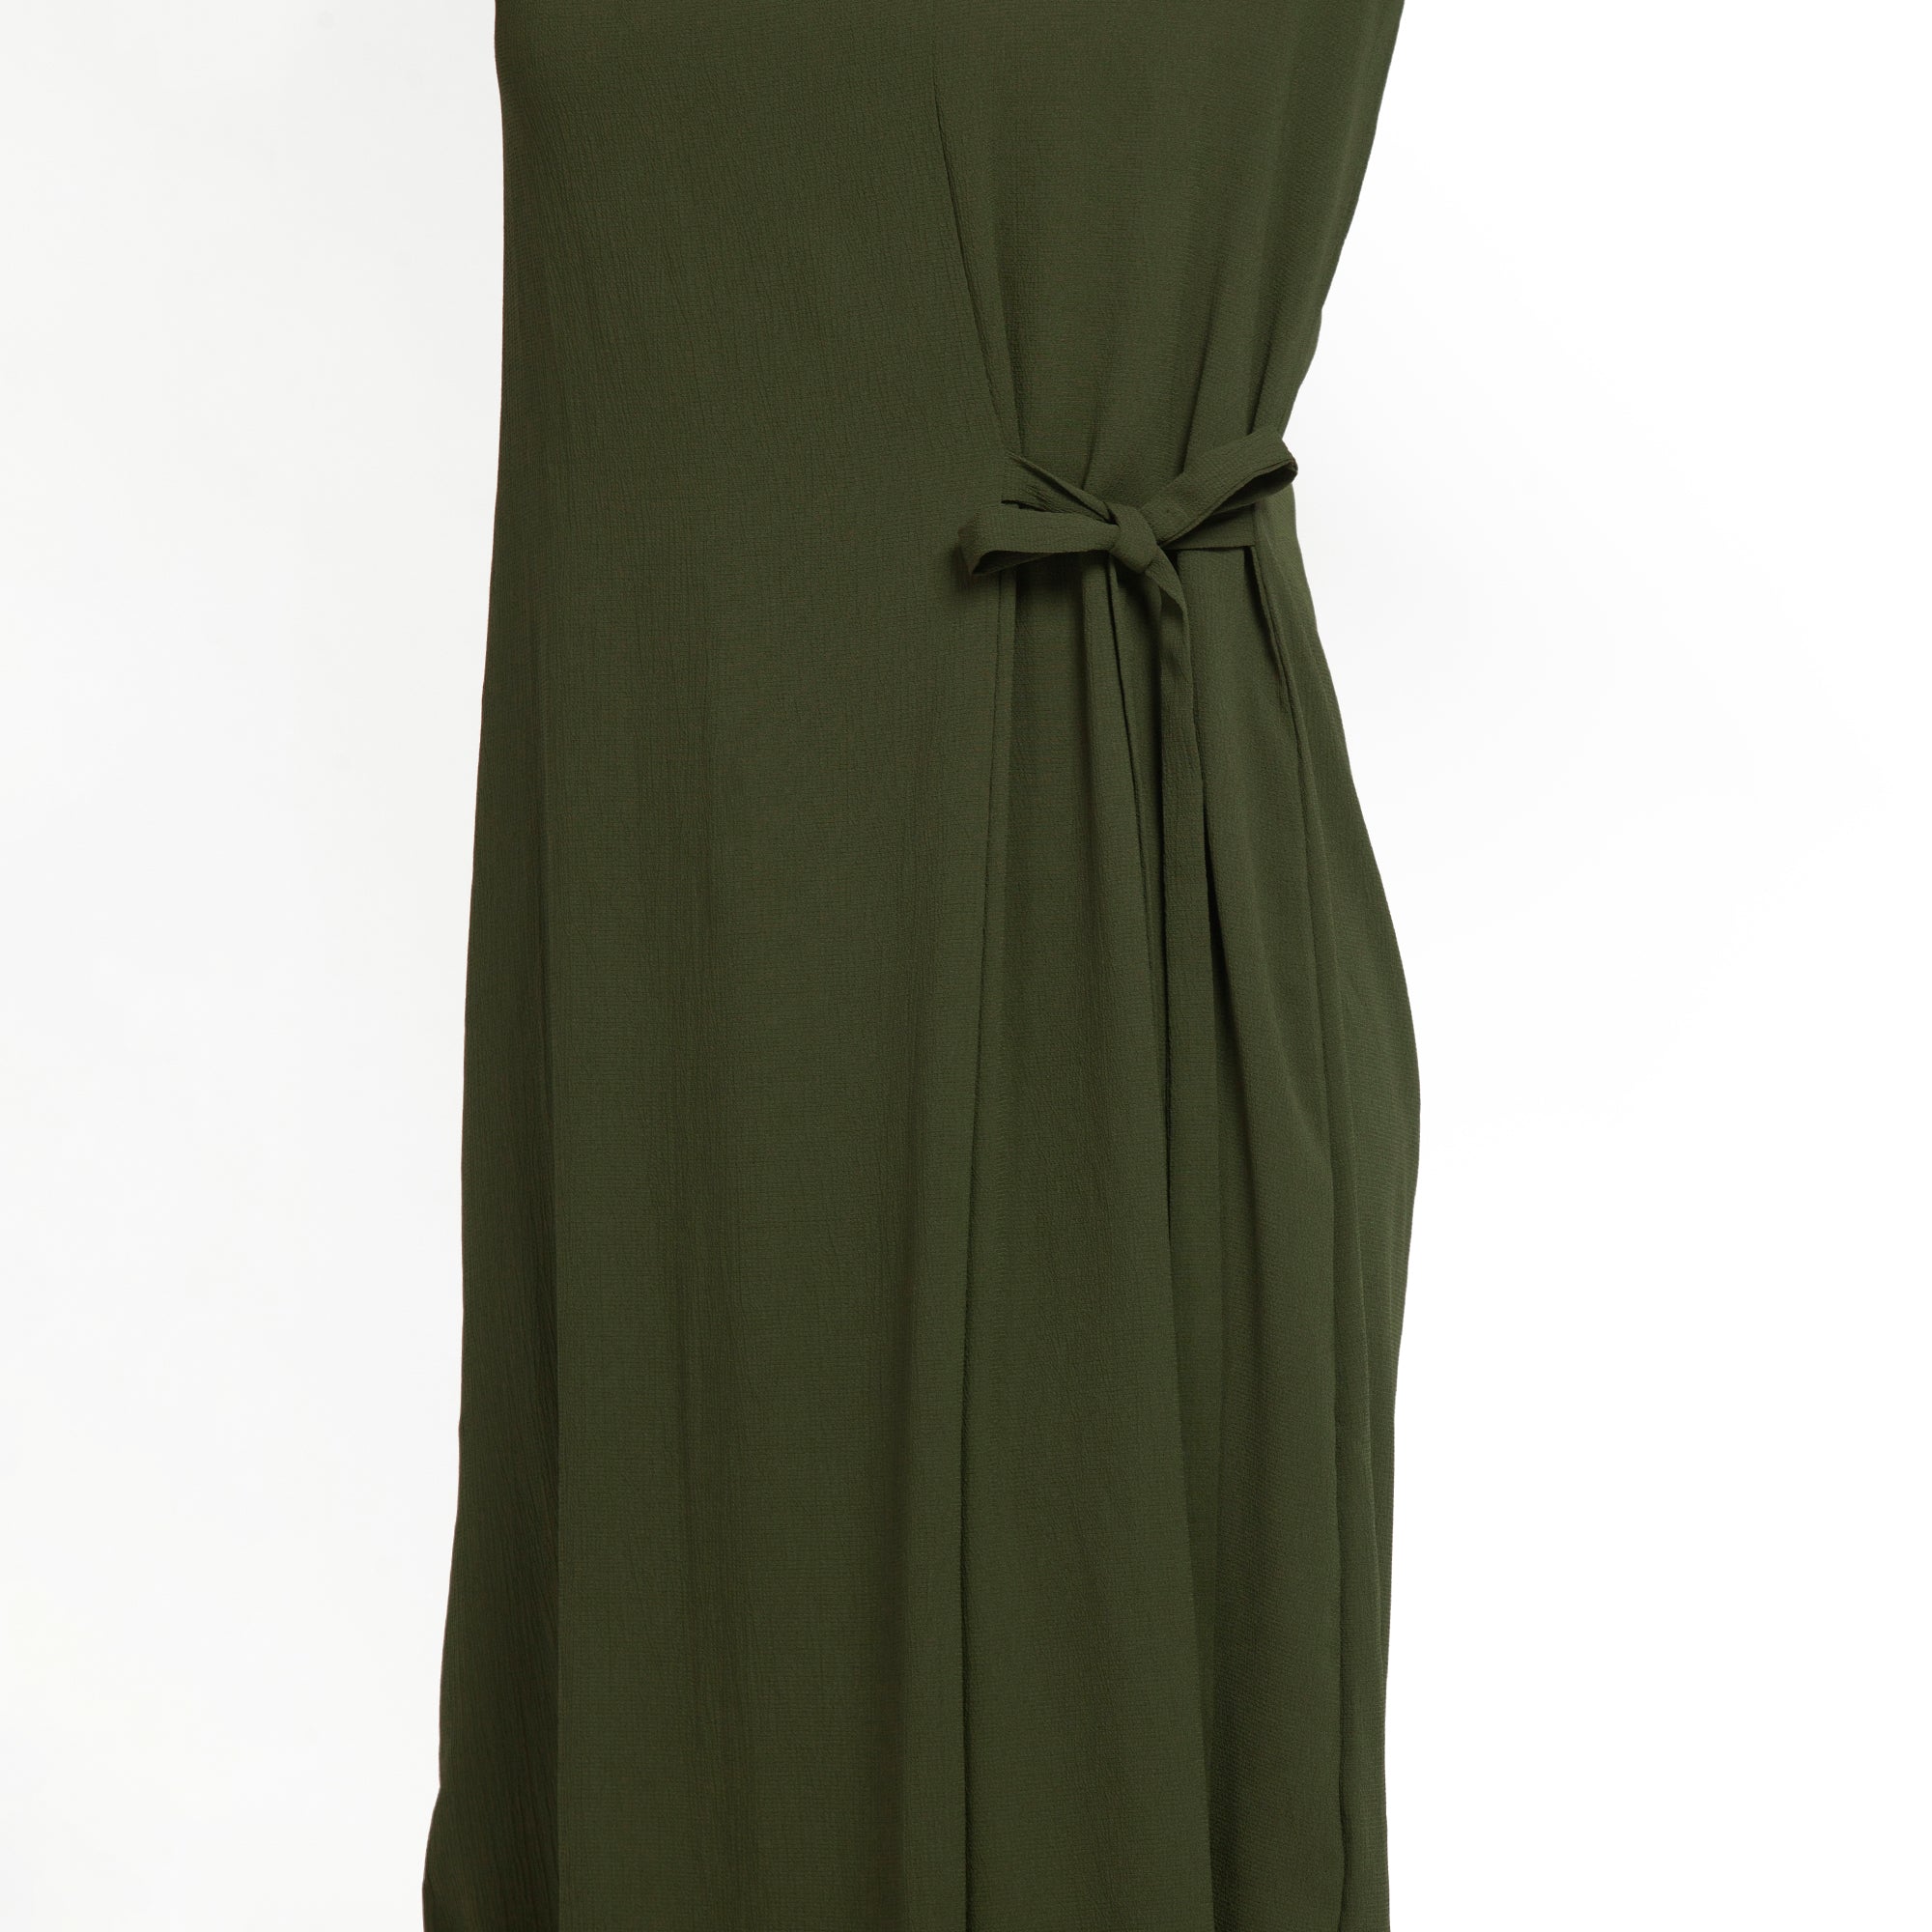 Green Crepe Tunic With Tie Knot